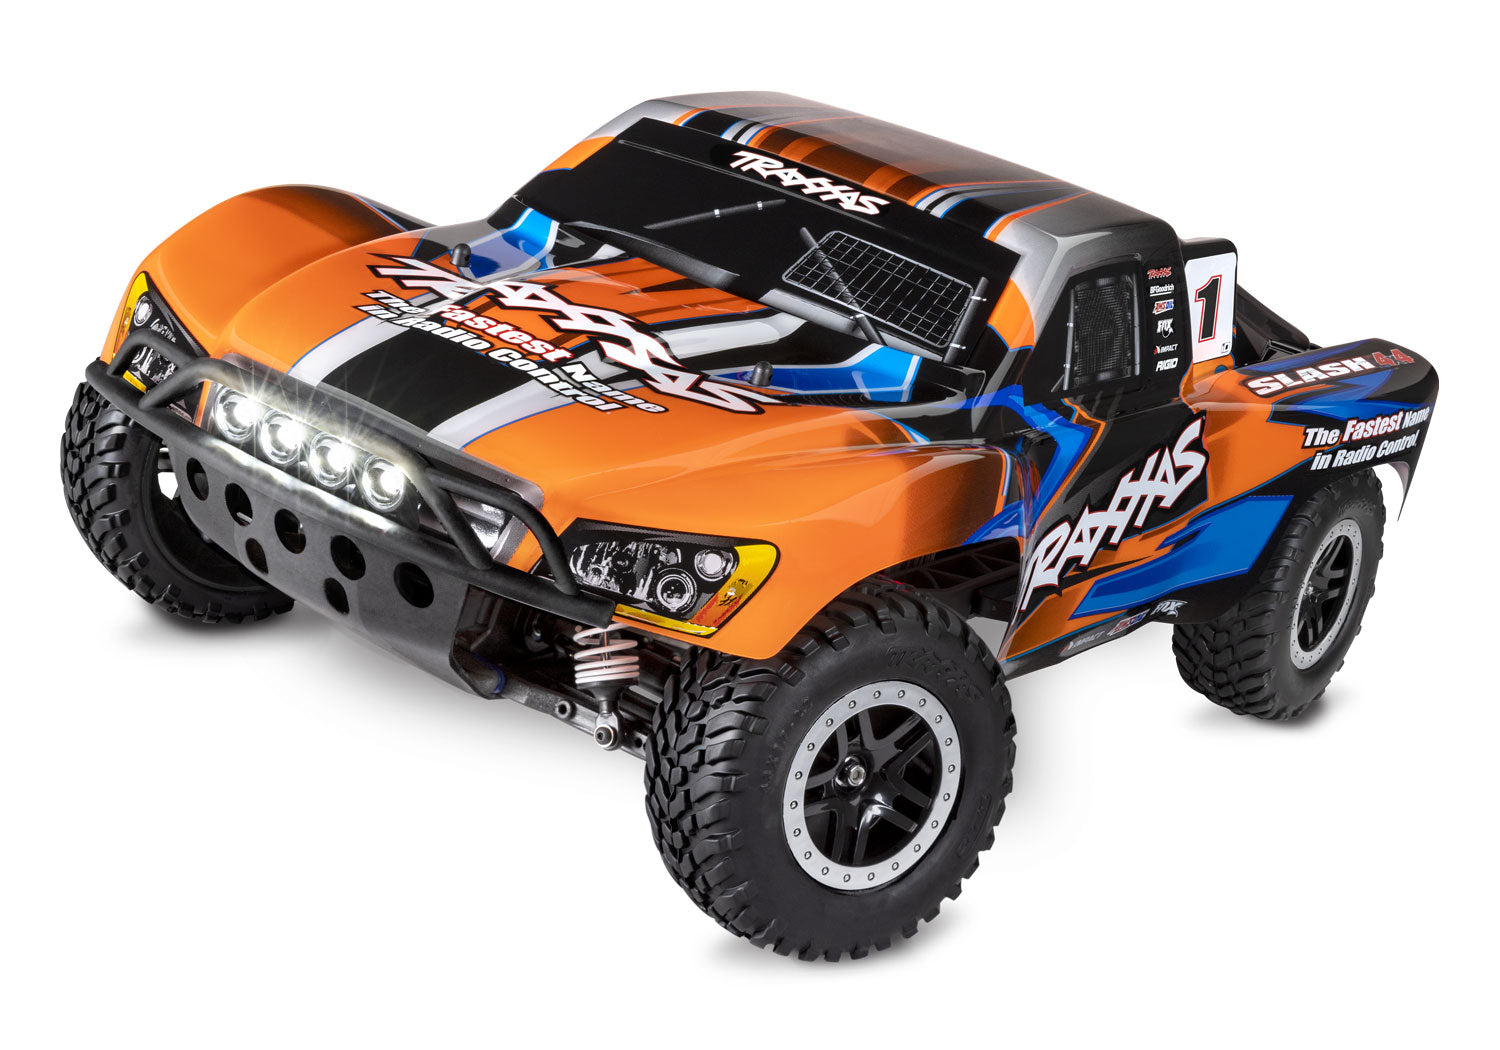 TRAXXAS 68054-61 Slash 4X4 1/10 scale waterproof short course truck. RTR, with TQ™ 2.4GHz radio system, XL-5® Electronic Speed Control, 8.4V NiMH 3000 mAh battery, 4-amp DC Charger, LED lighting, and painted body.